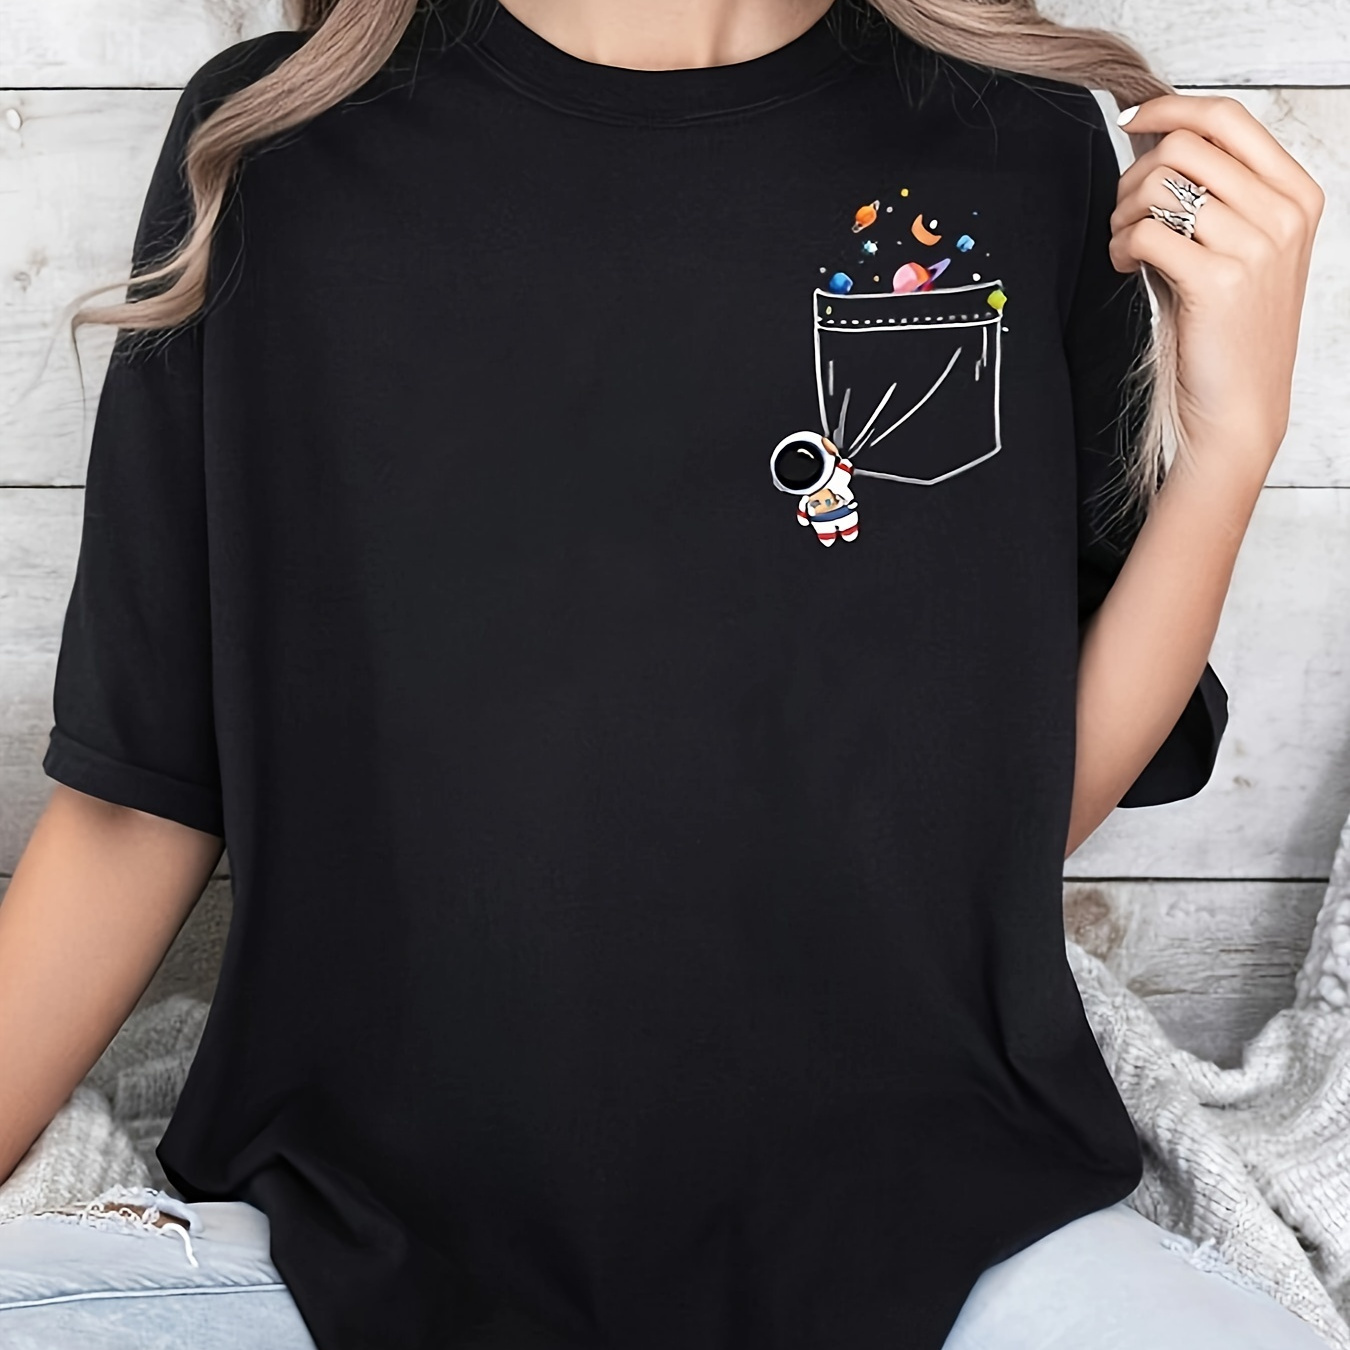 

Plus Size Pocket Astronaut Print T-shirt, Casual Short Sleeve Top For Spring & Summer, Women's Plus Size Clothing